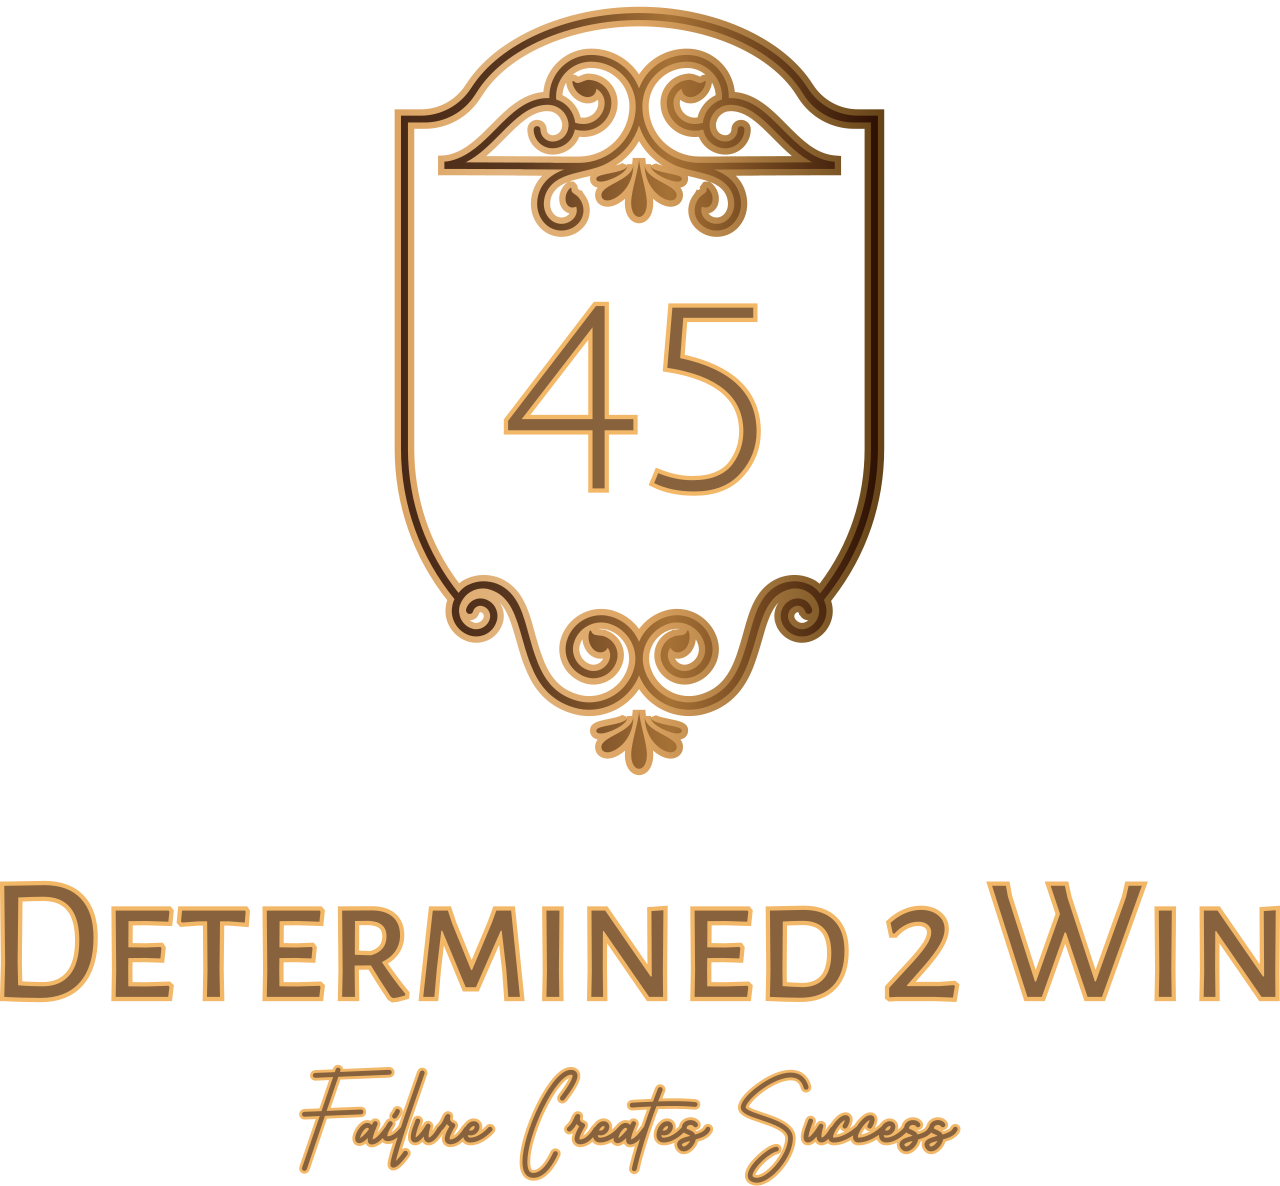 Determined 2 Win "45"'s web page